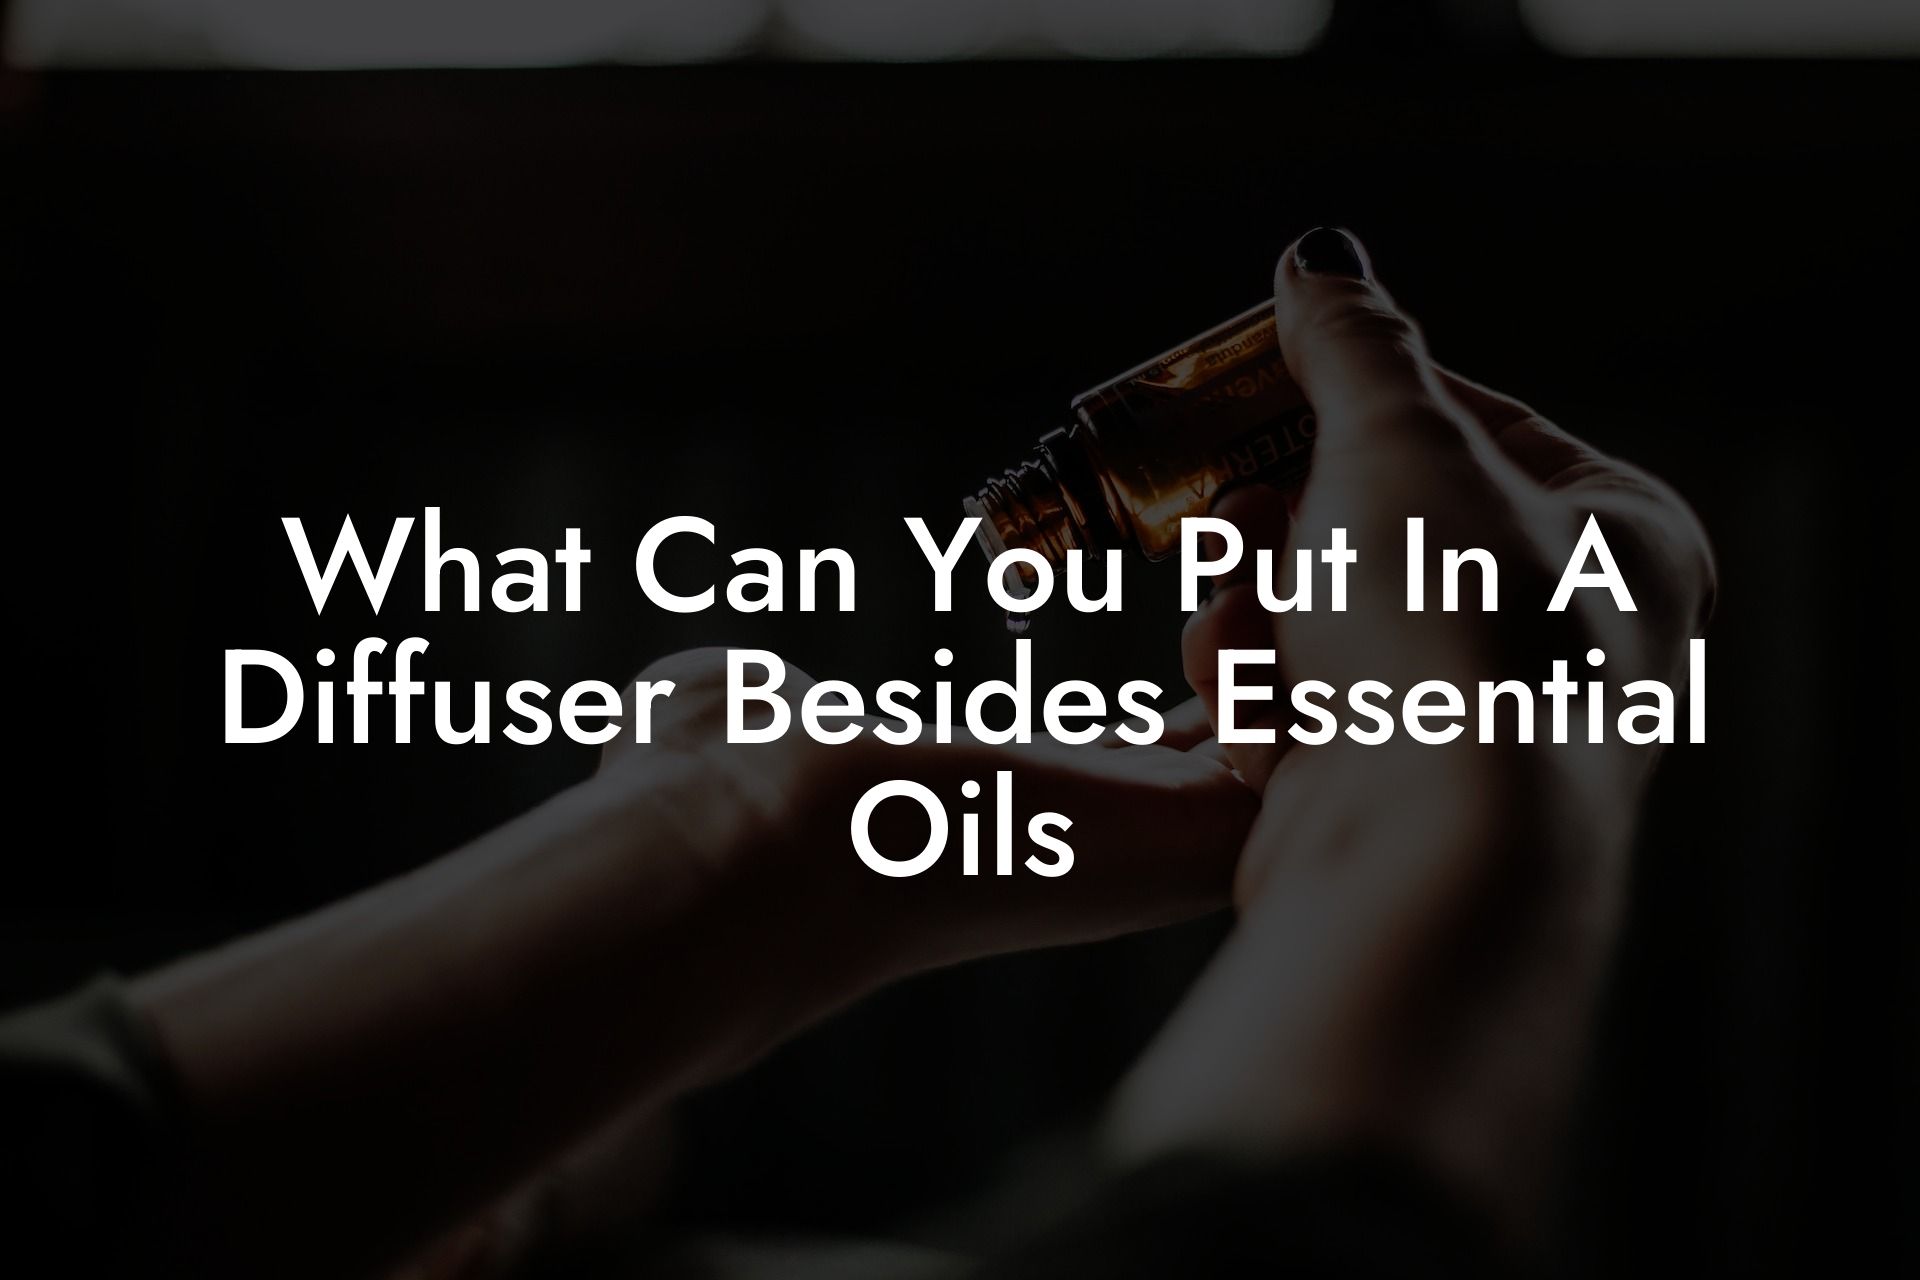 What Can You Put In A Diffuser Besides Essential Oils